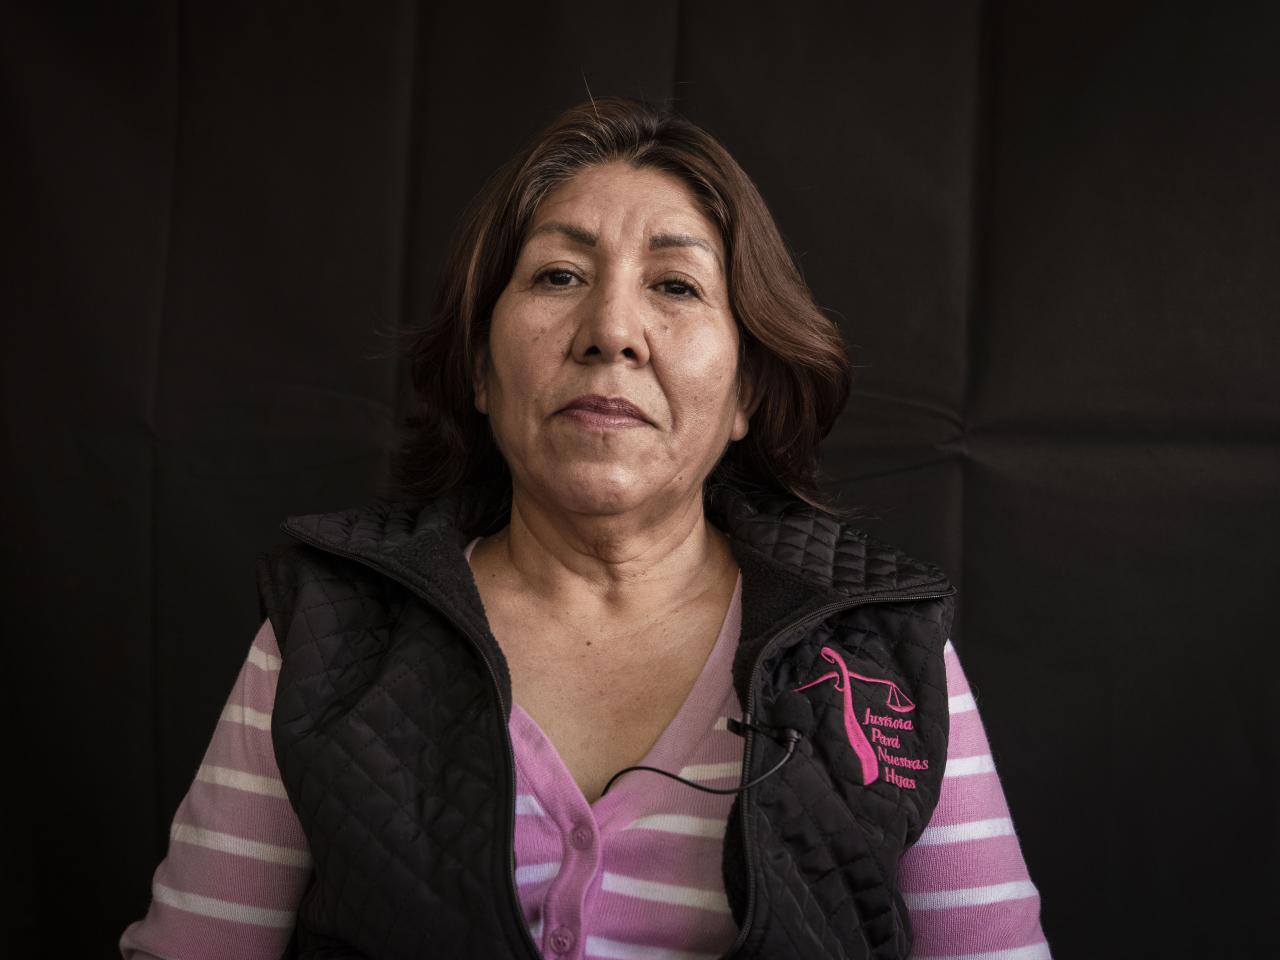 Norma Ledezma, Founder of Justice For Our Daughters. Photo: Celsa Calderoni